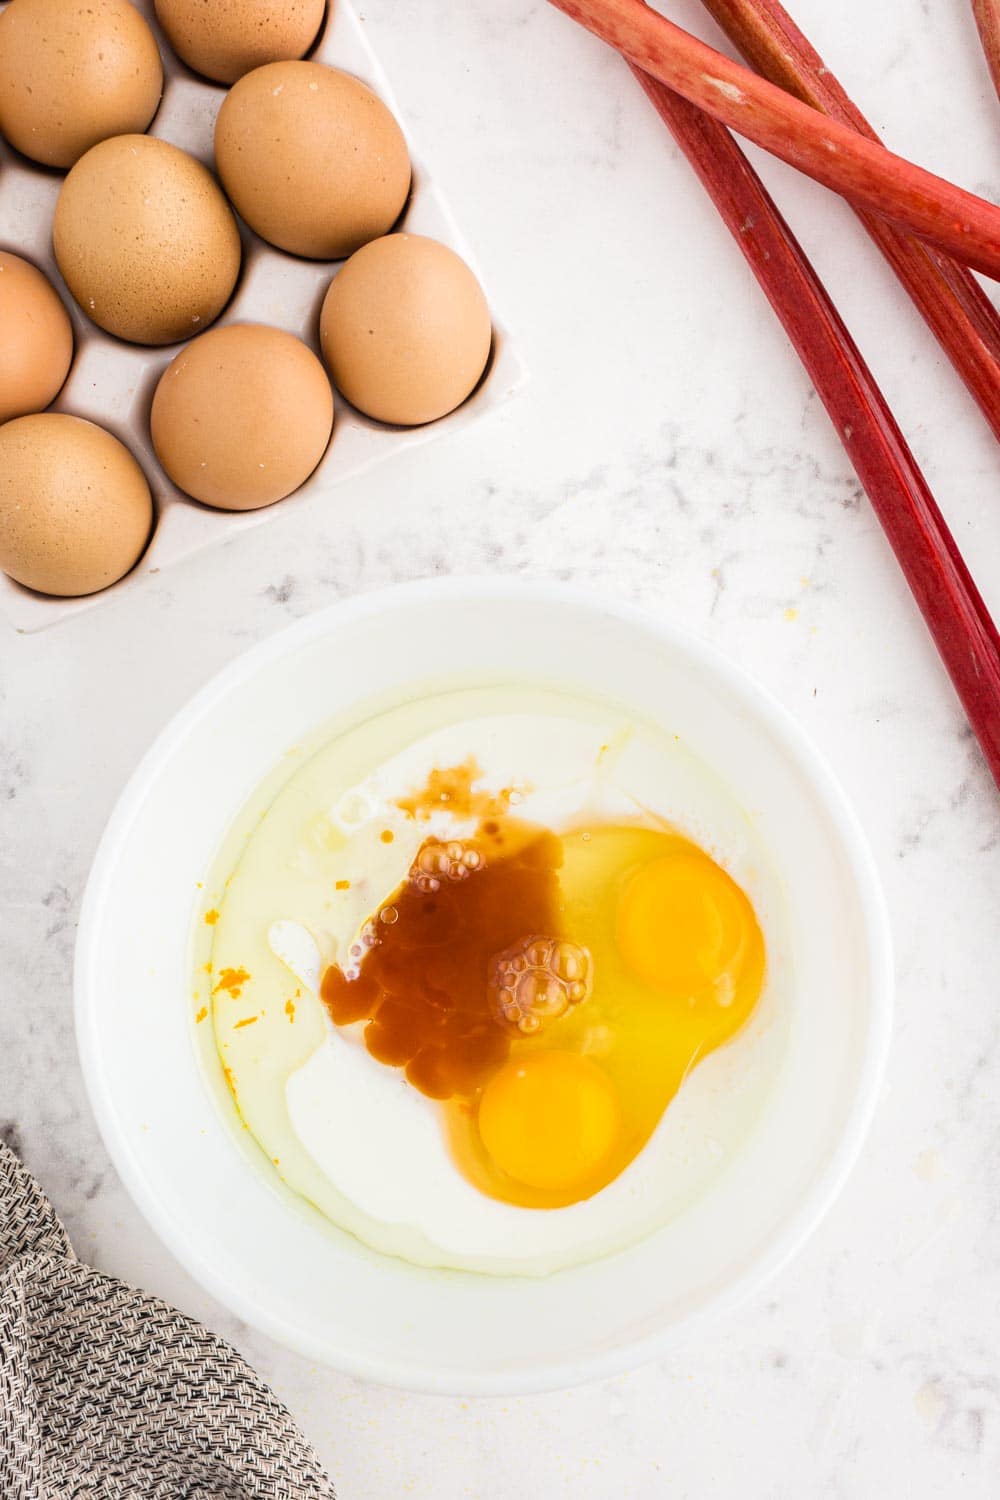 sugar, orange zest, vanilla, vegetable oil, milk, and eggs in a white mixing bowl atop a white marble surface with fresh eggs and rhubarb in the background